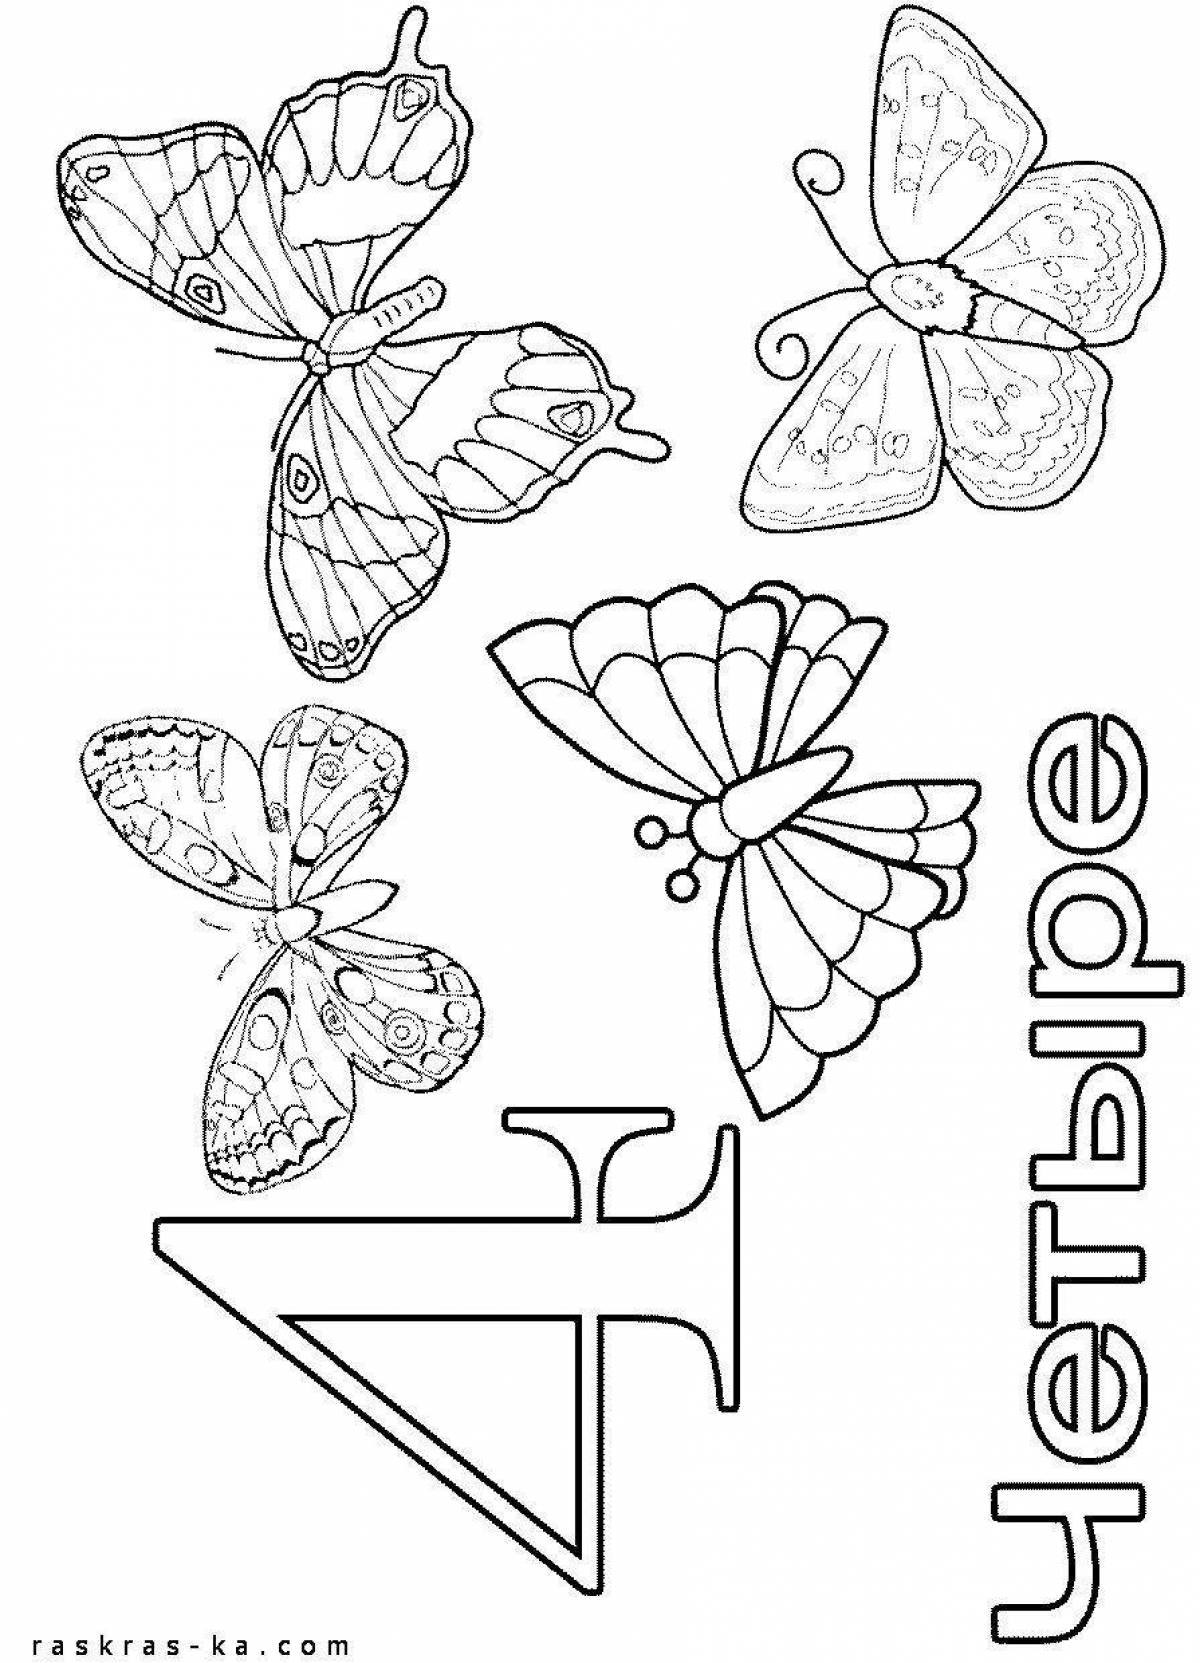 Fun coloring page four